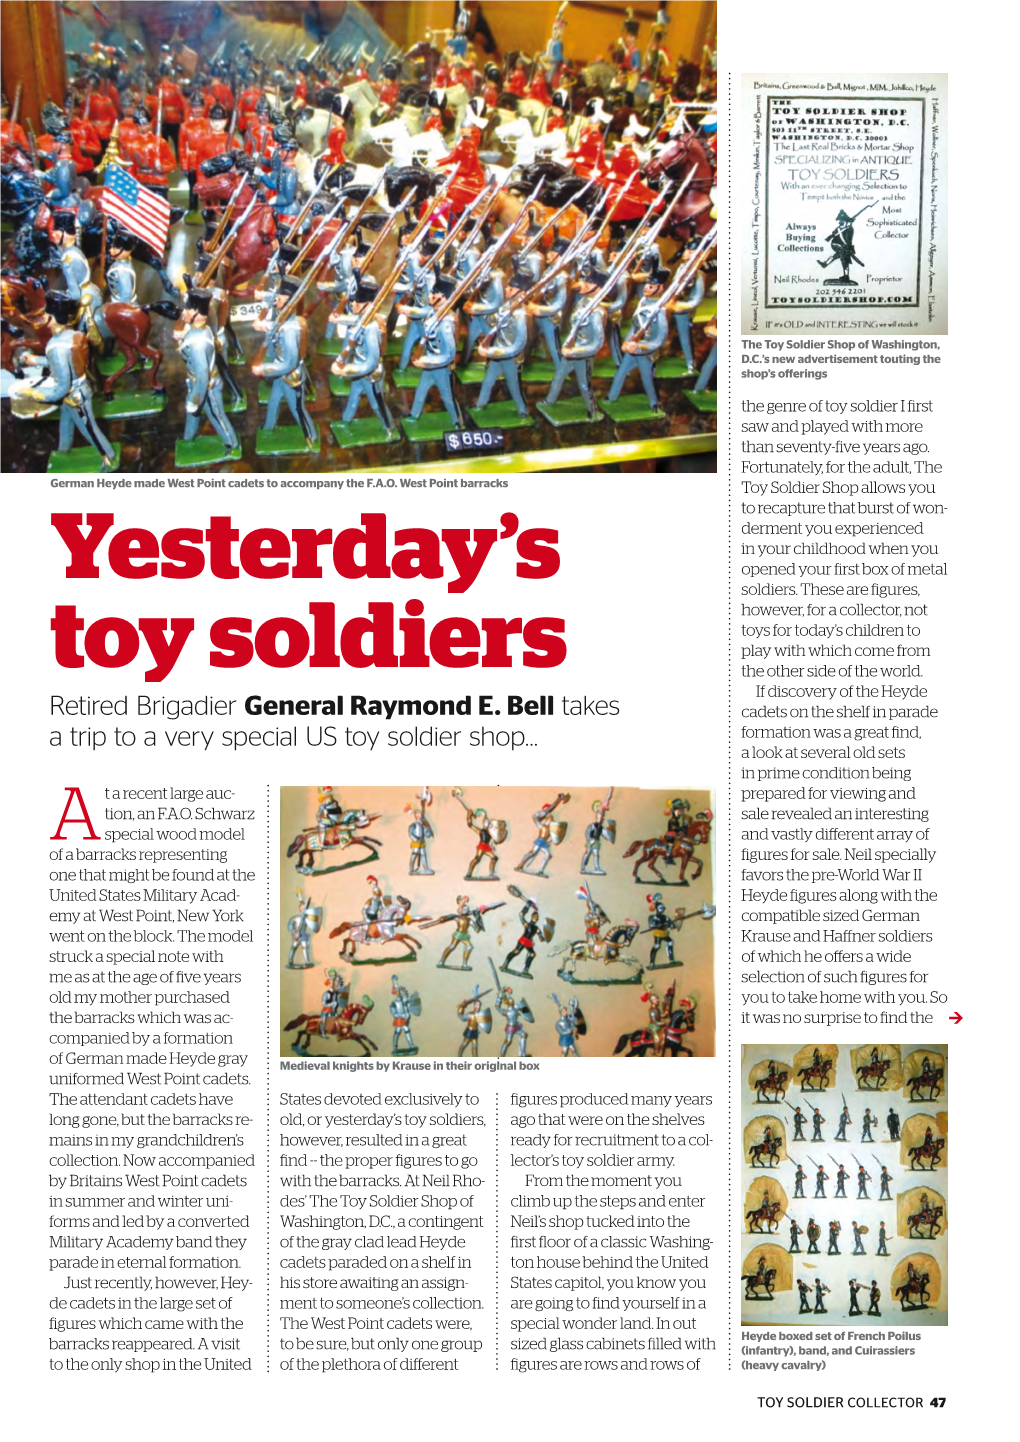 Yesterday's Toy Soldiers